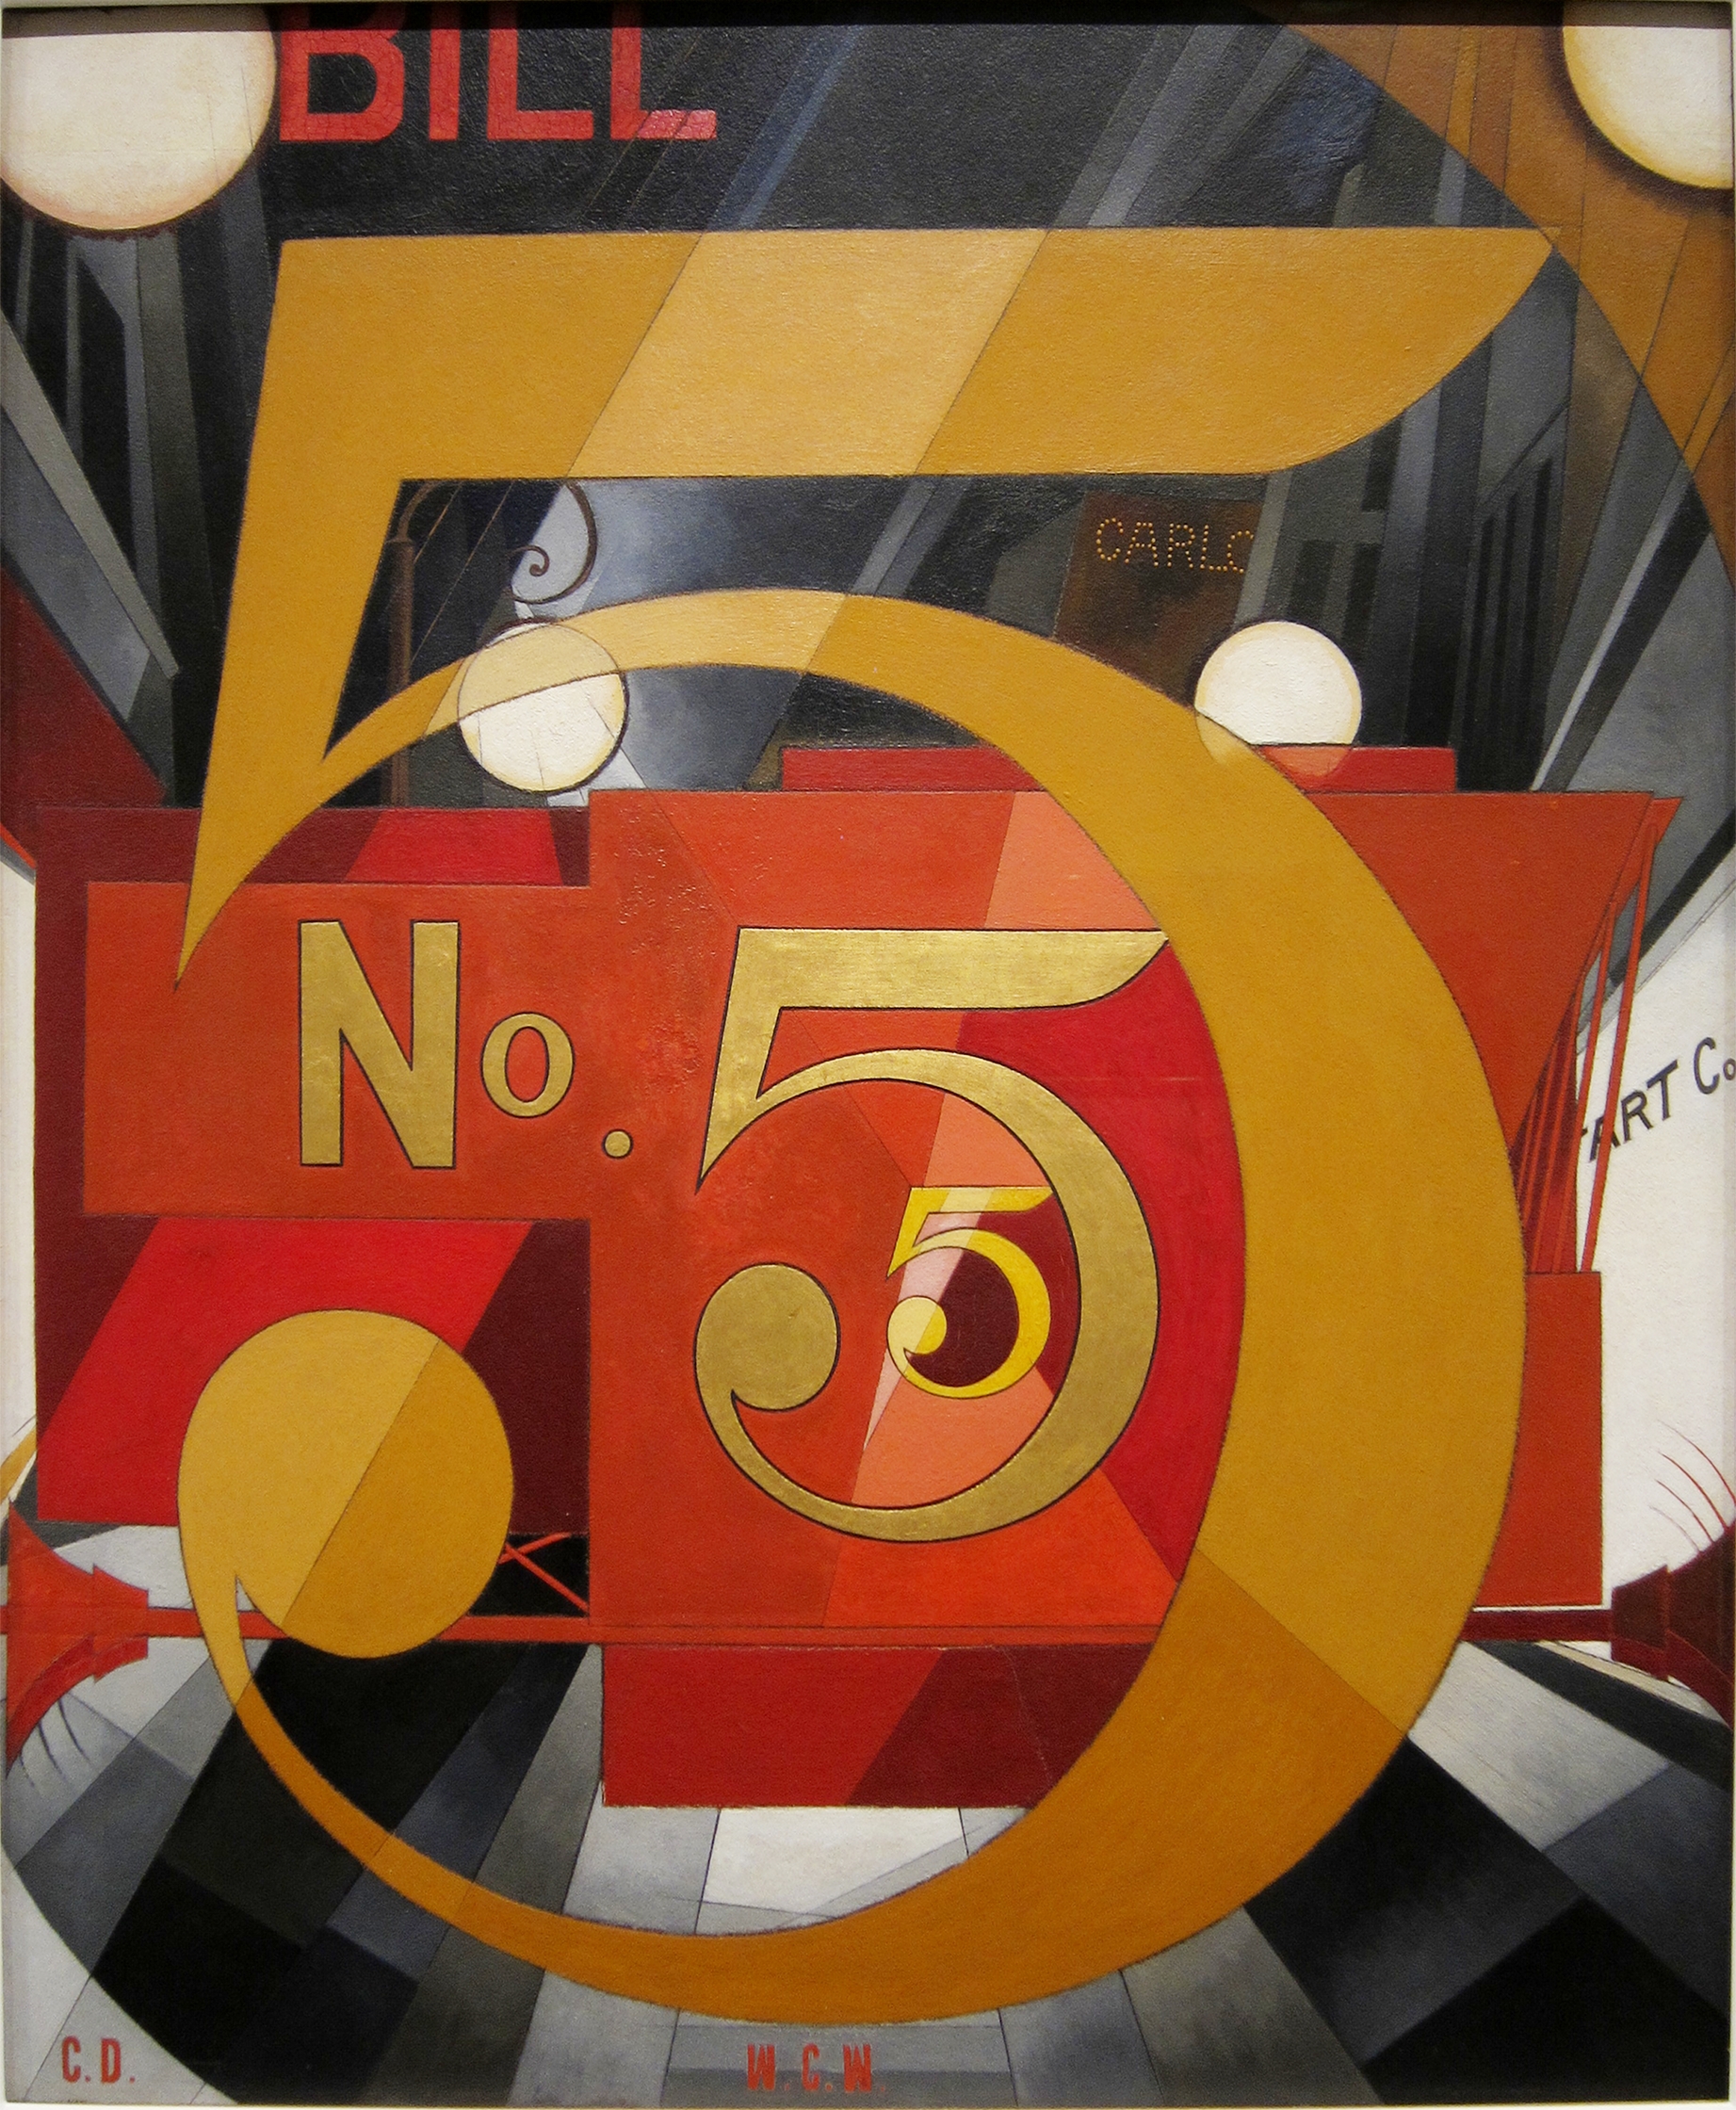 Charles Sheeler, I Saw the Figure 5 in Gold, 1928, huile, graphite, encre et feuille d'or sur carton, 90,2 × 76,2 cm, collection Alfred Stieglitz, Metropolitan Museum of Art, New York.